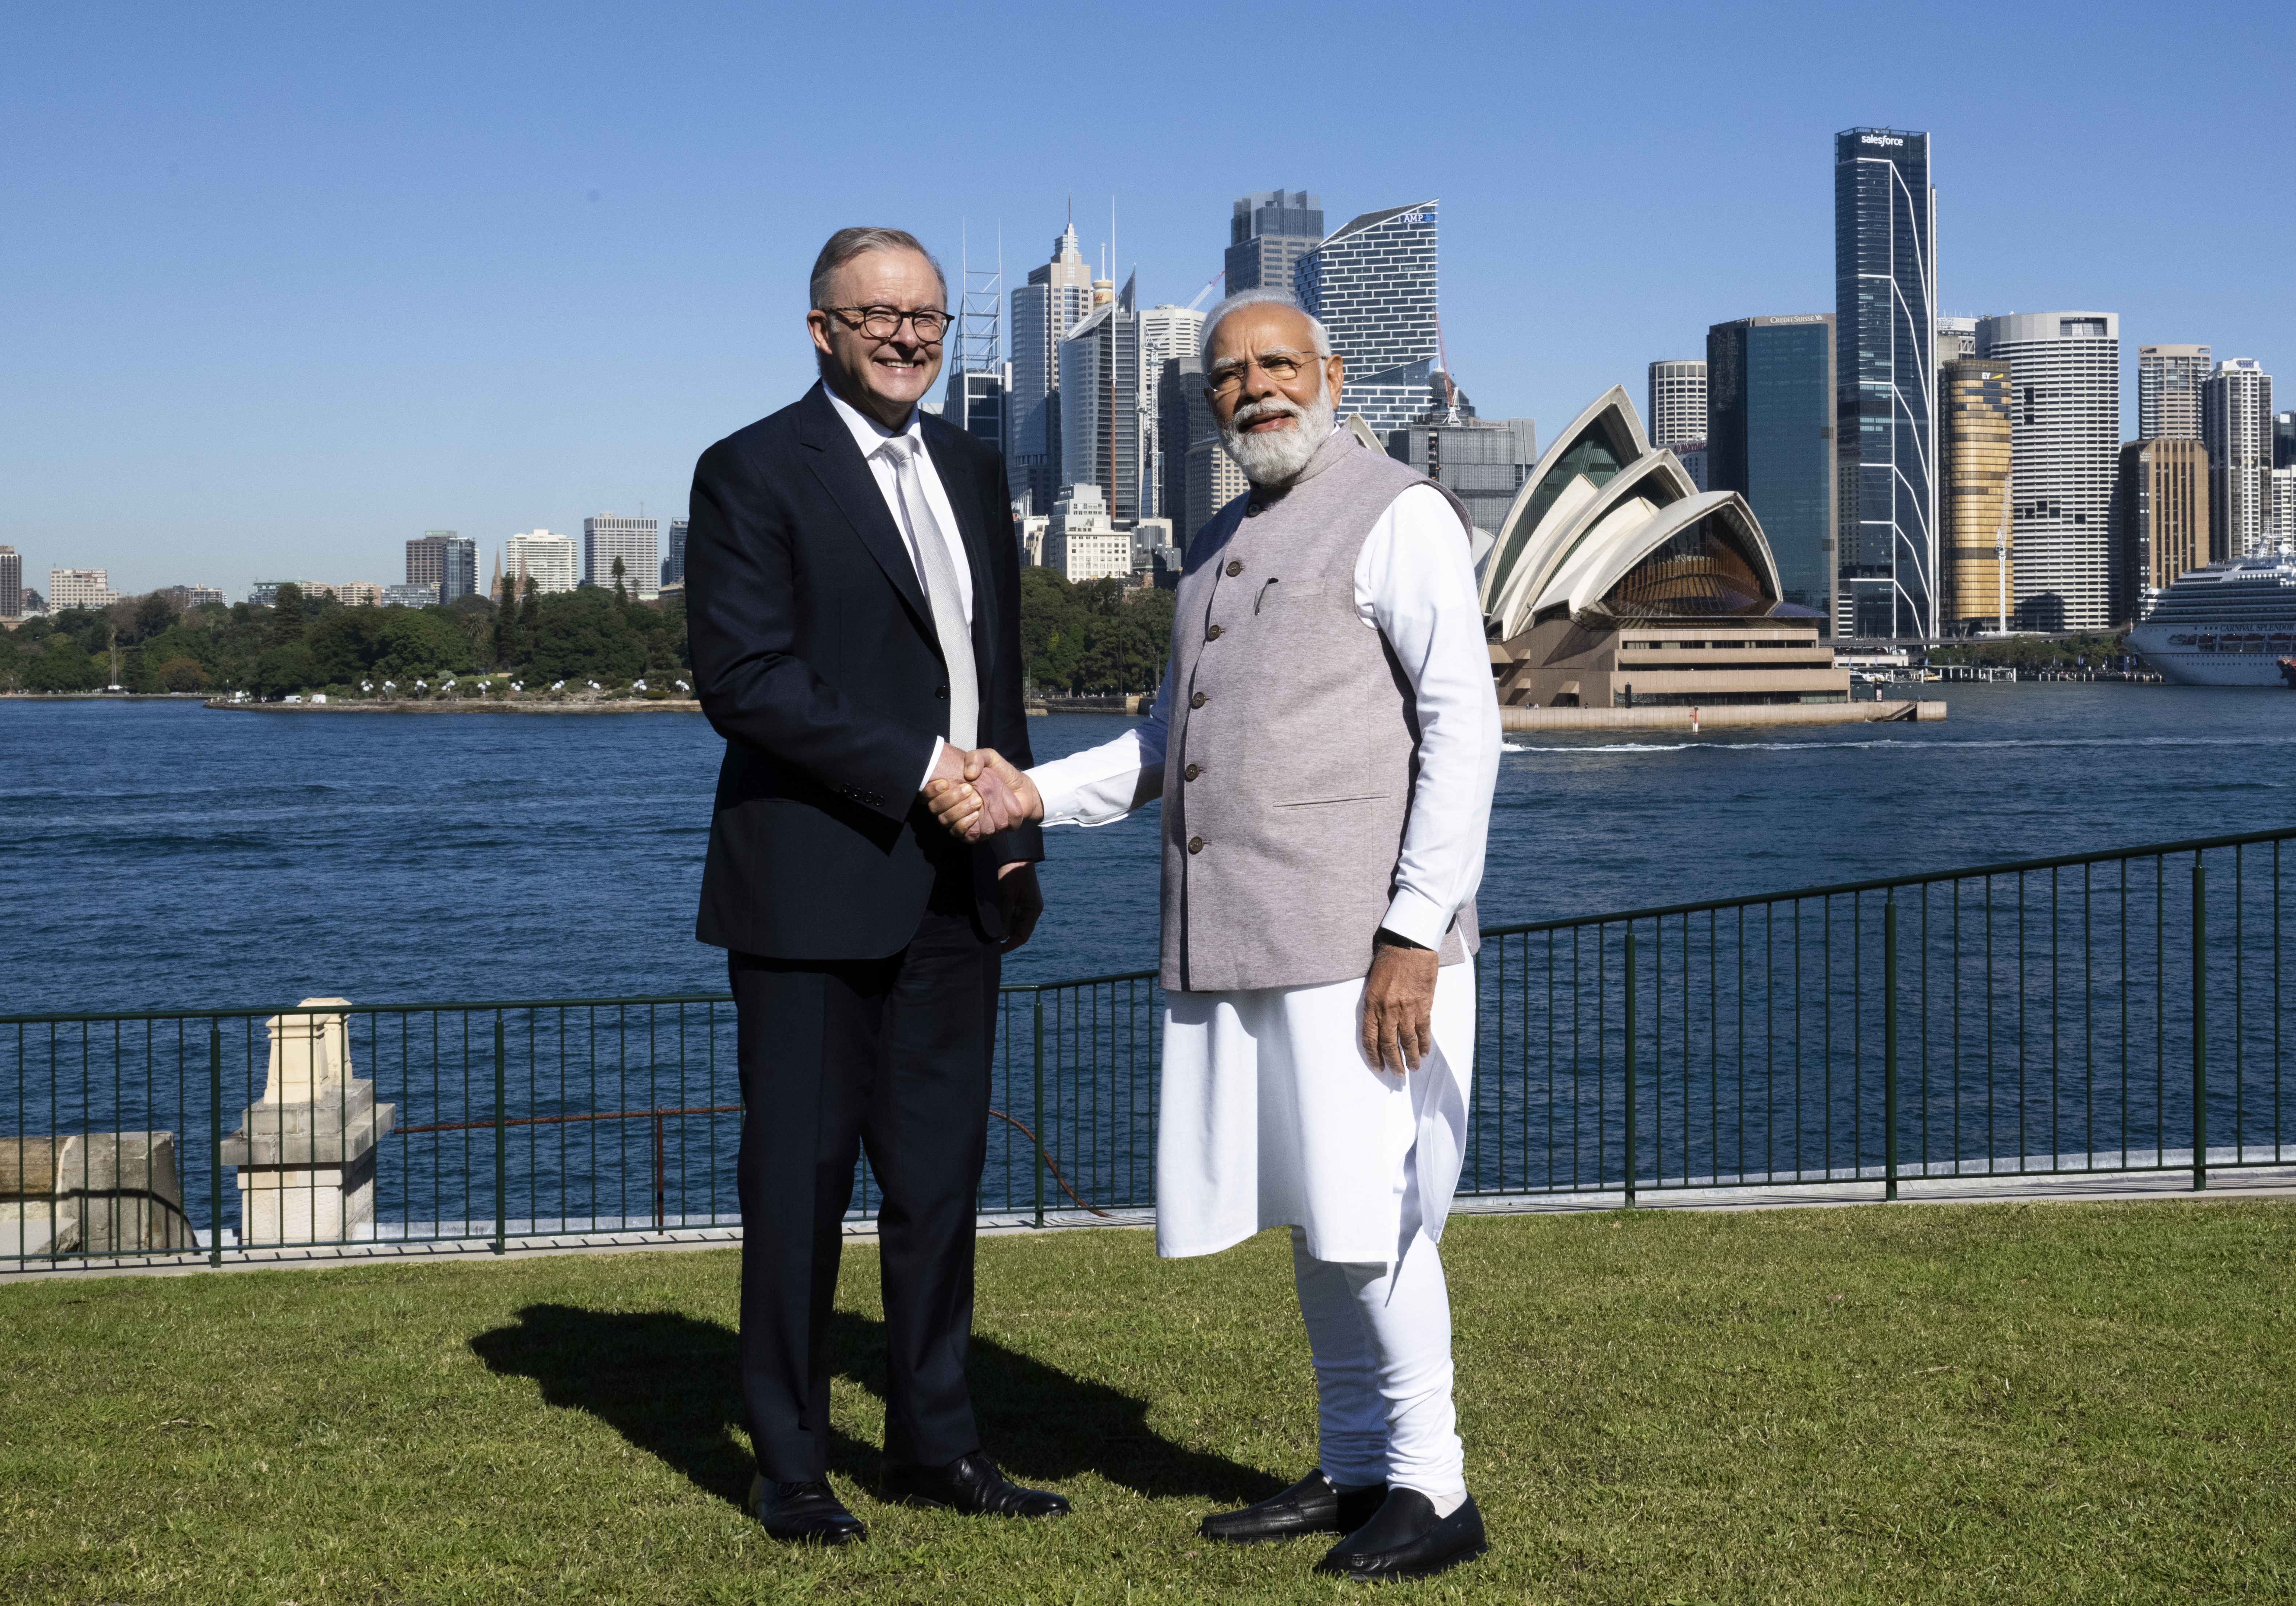 POOL Prime Minister Anthony Albanese and Indian Prime Minister Narendra Modi at Admiralty House in Sydney. May 24, 2023 Photo: Janie Barrett